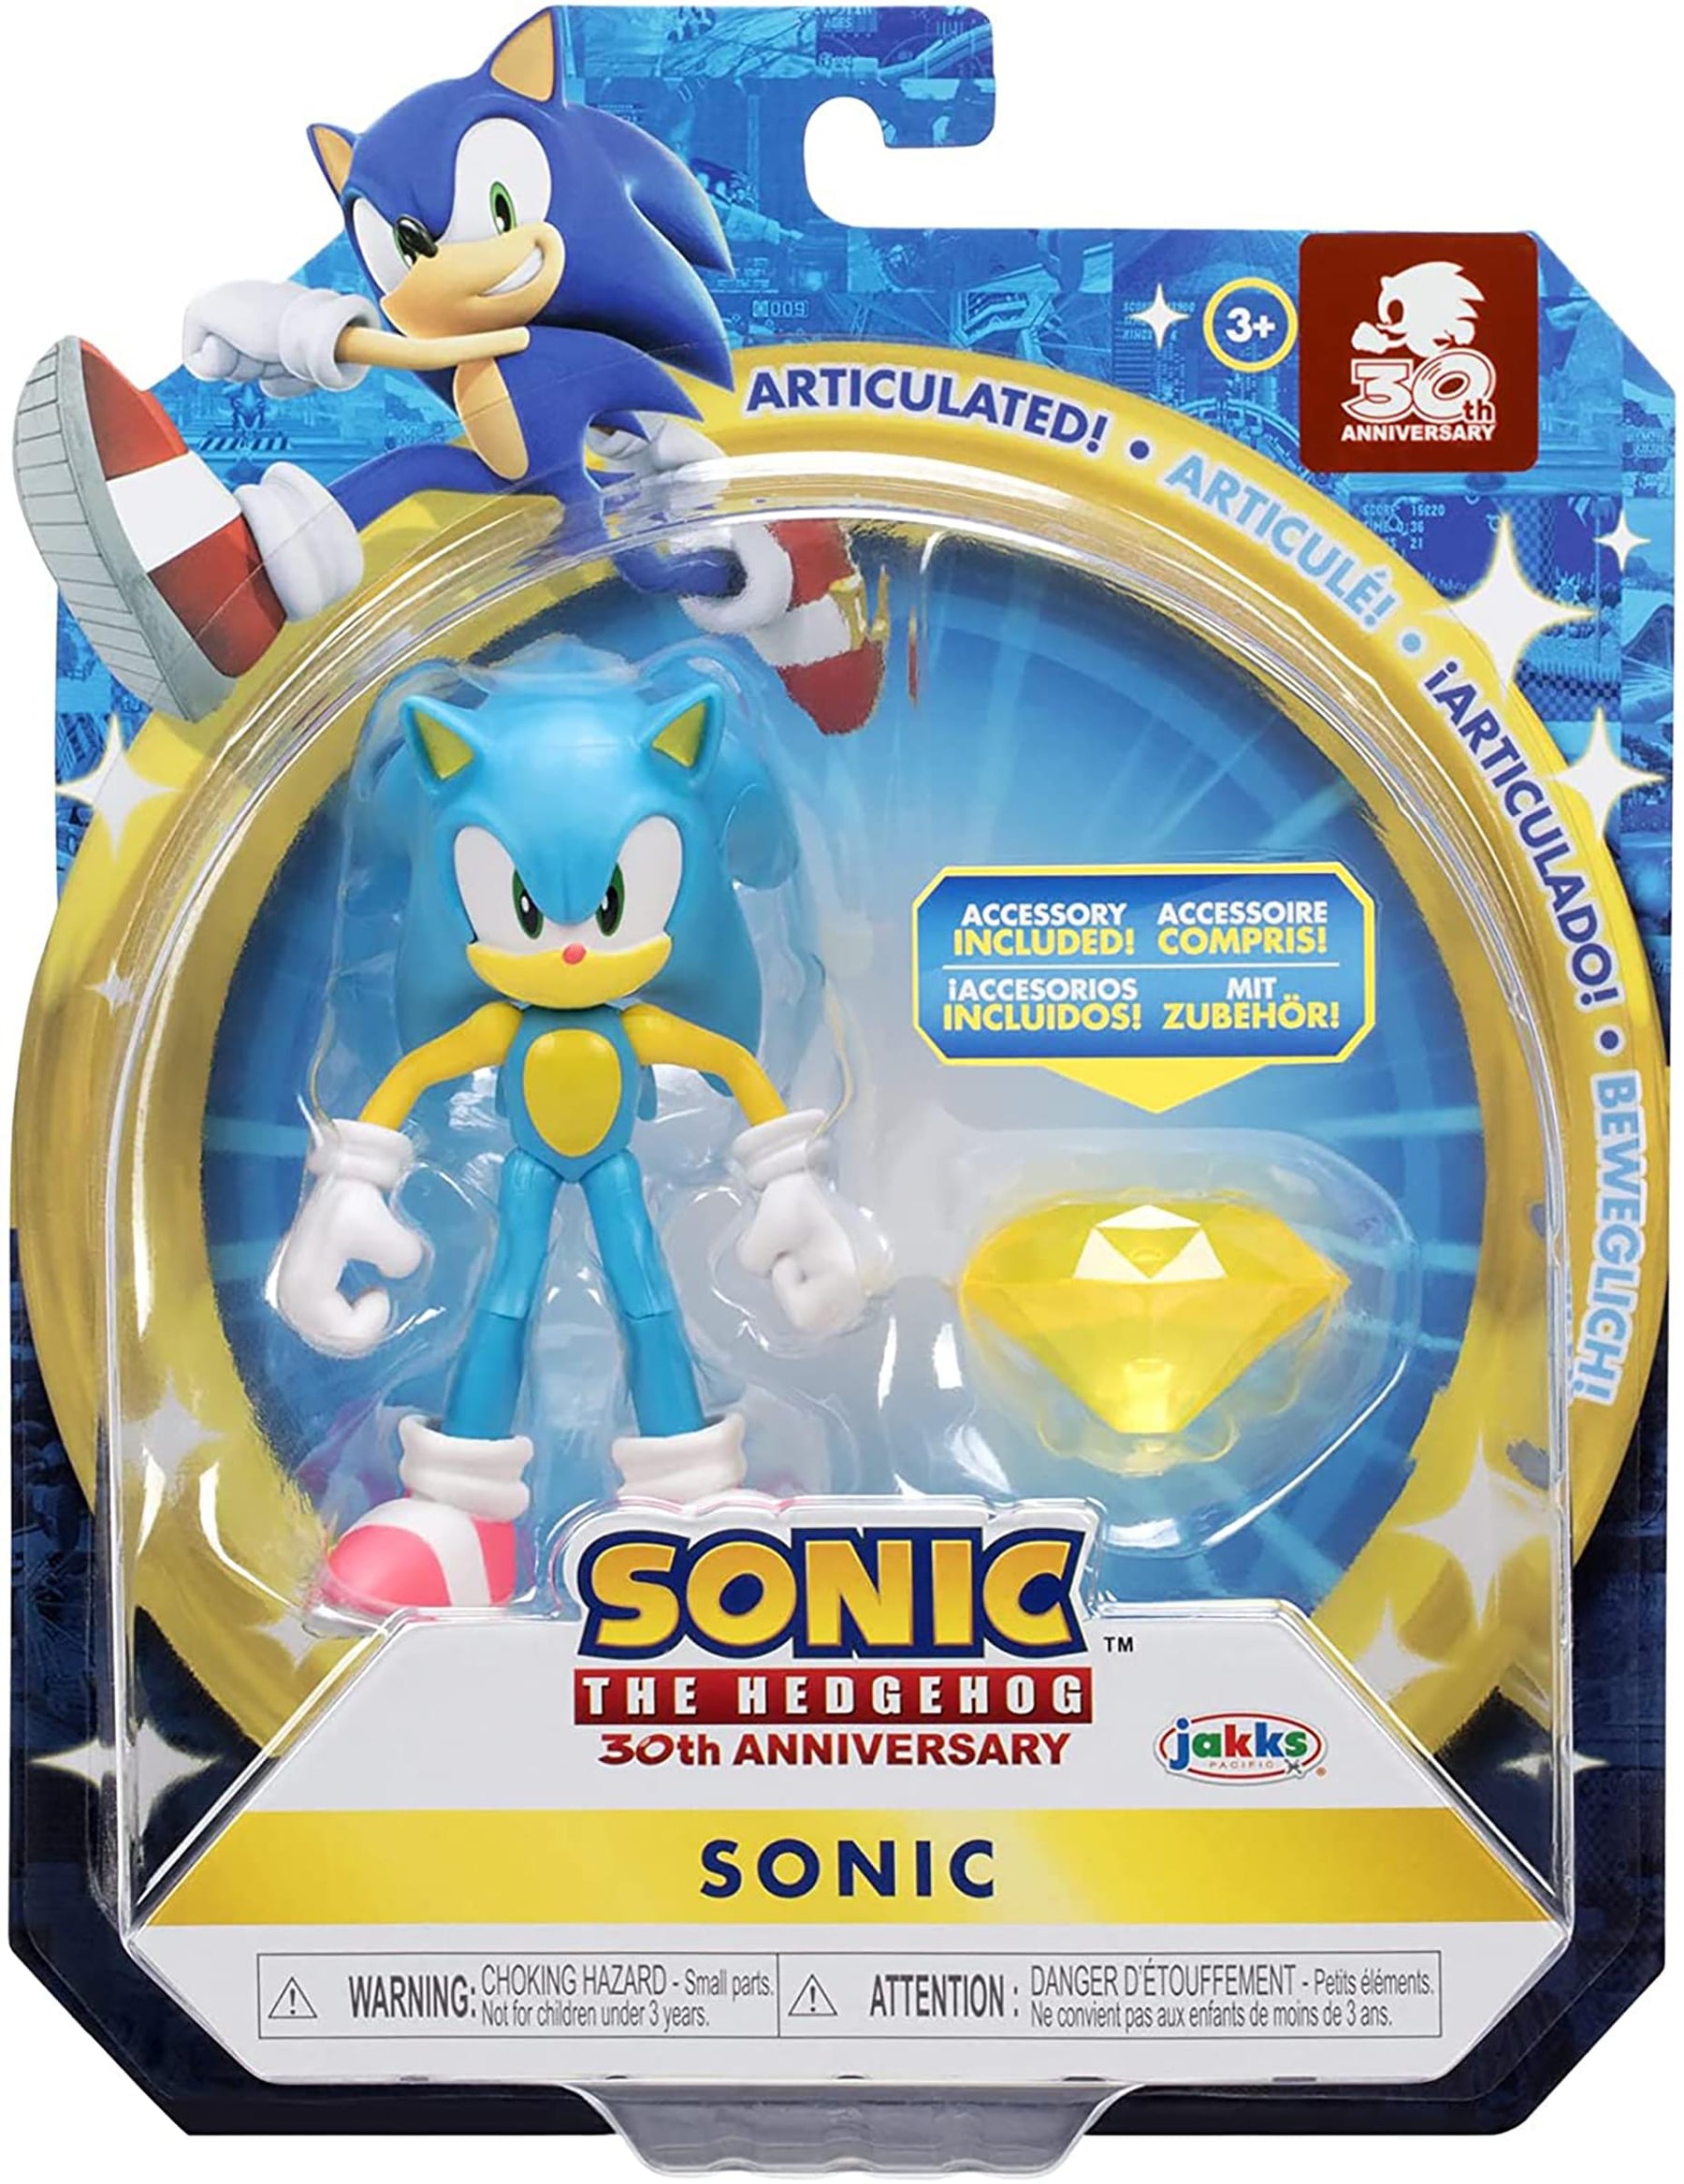 First 4 Figures Looking For Interest in Sonic the Hedgehog Chao